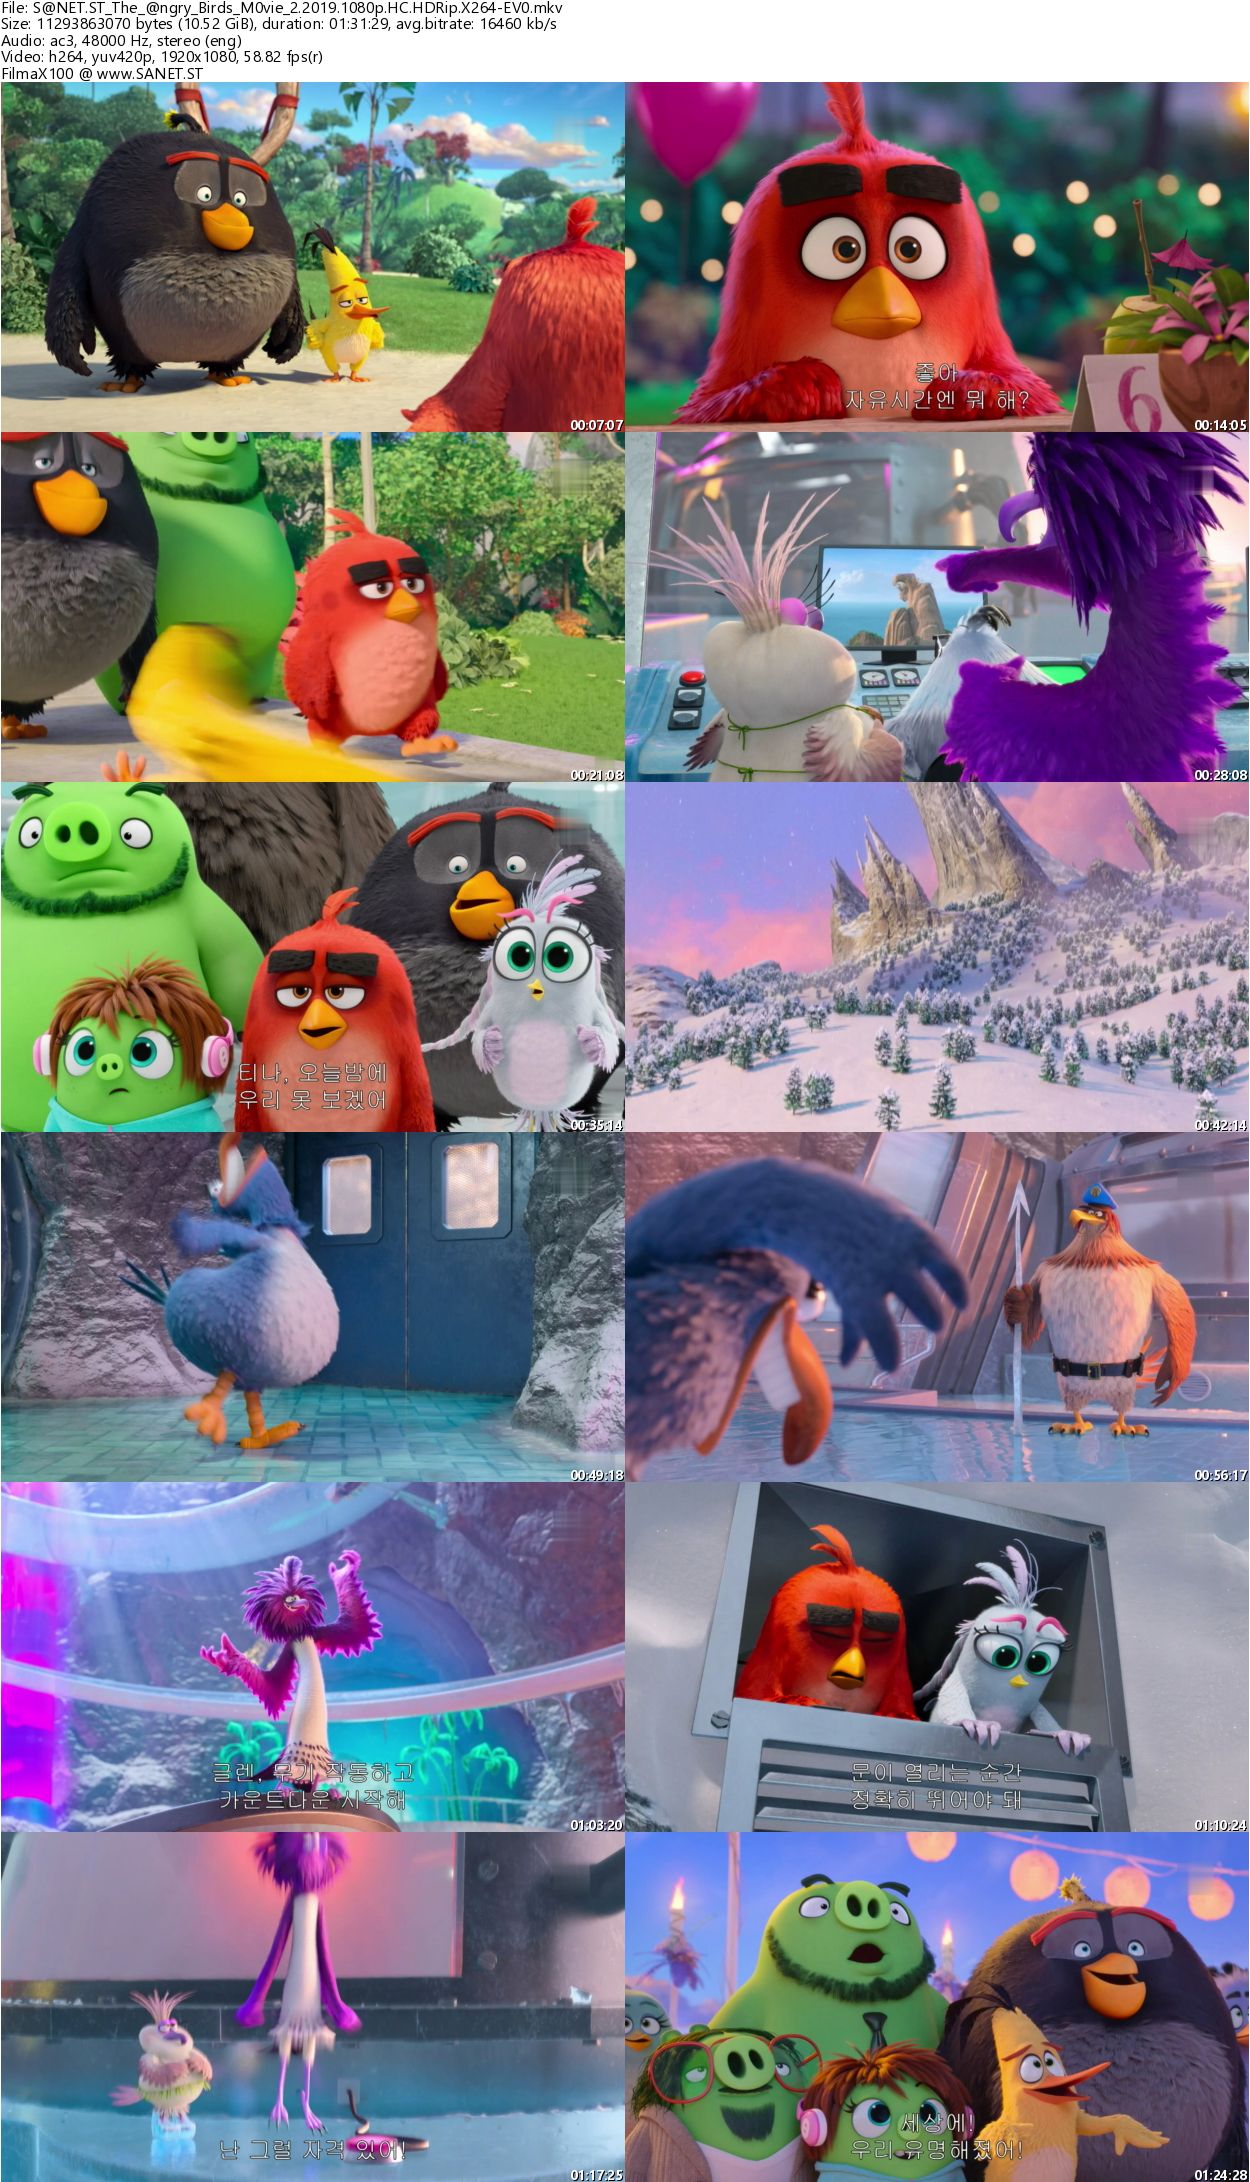 voices of angry birds 2